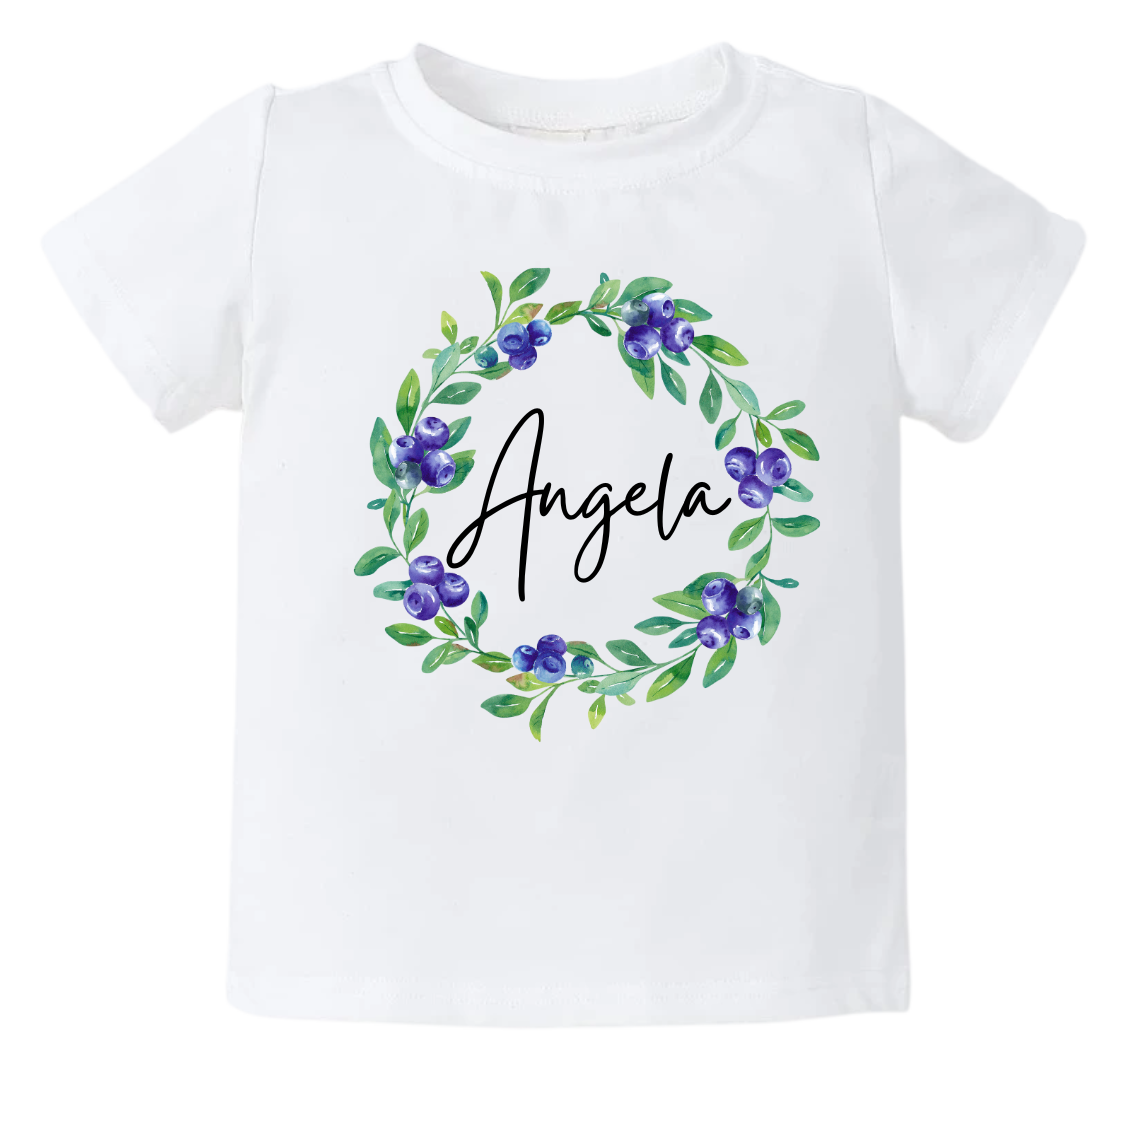 Kid's t-shirt with a cute blueberry floral wreath design, customizable with names.